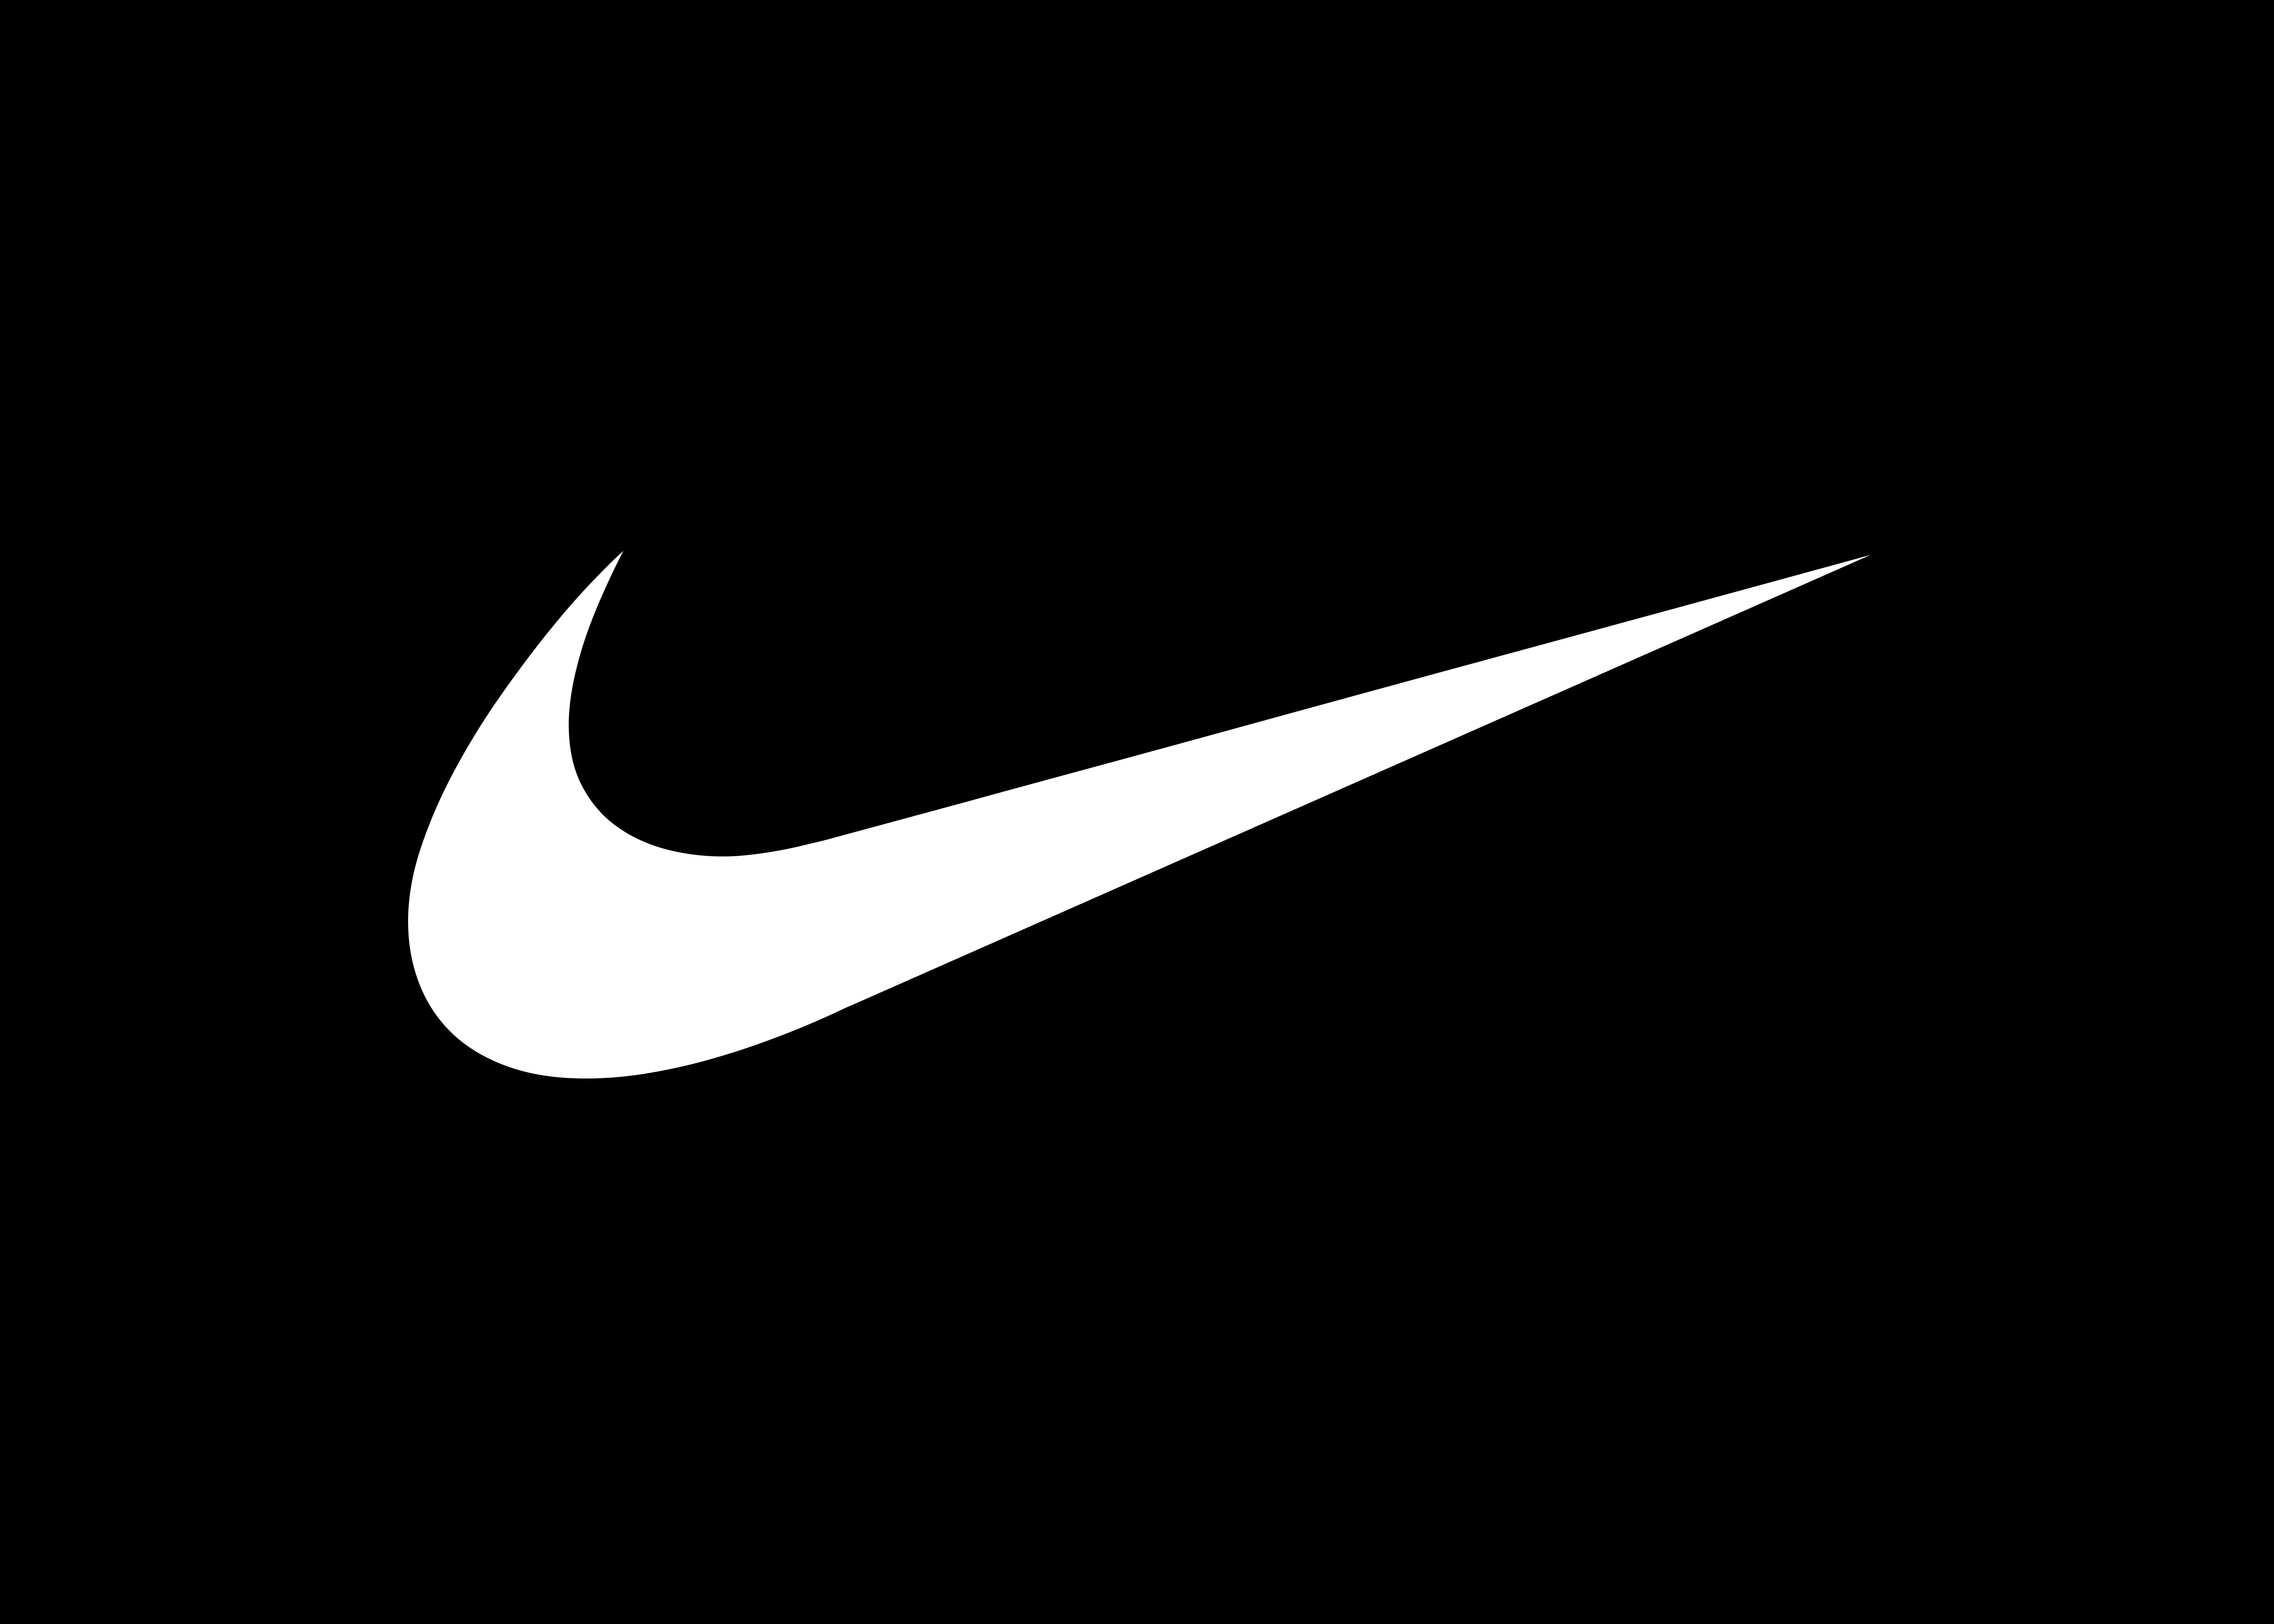 An example of foreign investments would be the Nike company. Nike is originally an American company but branched out into chi